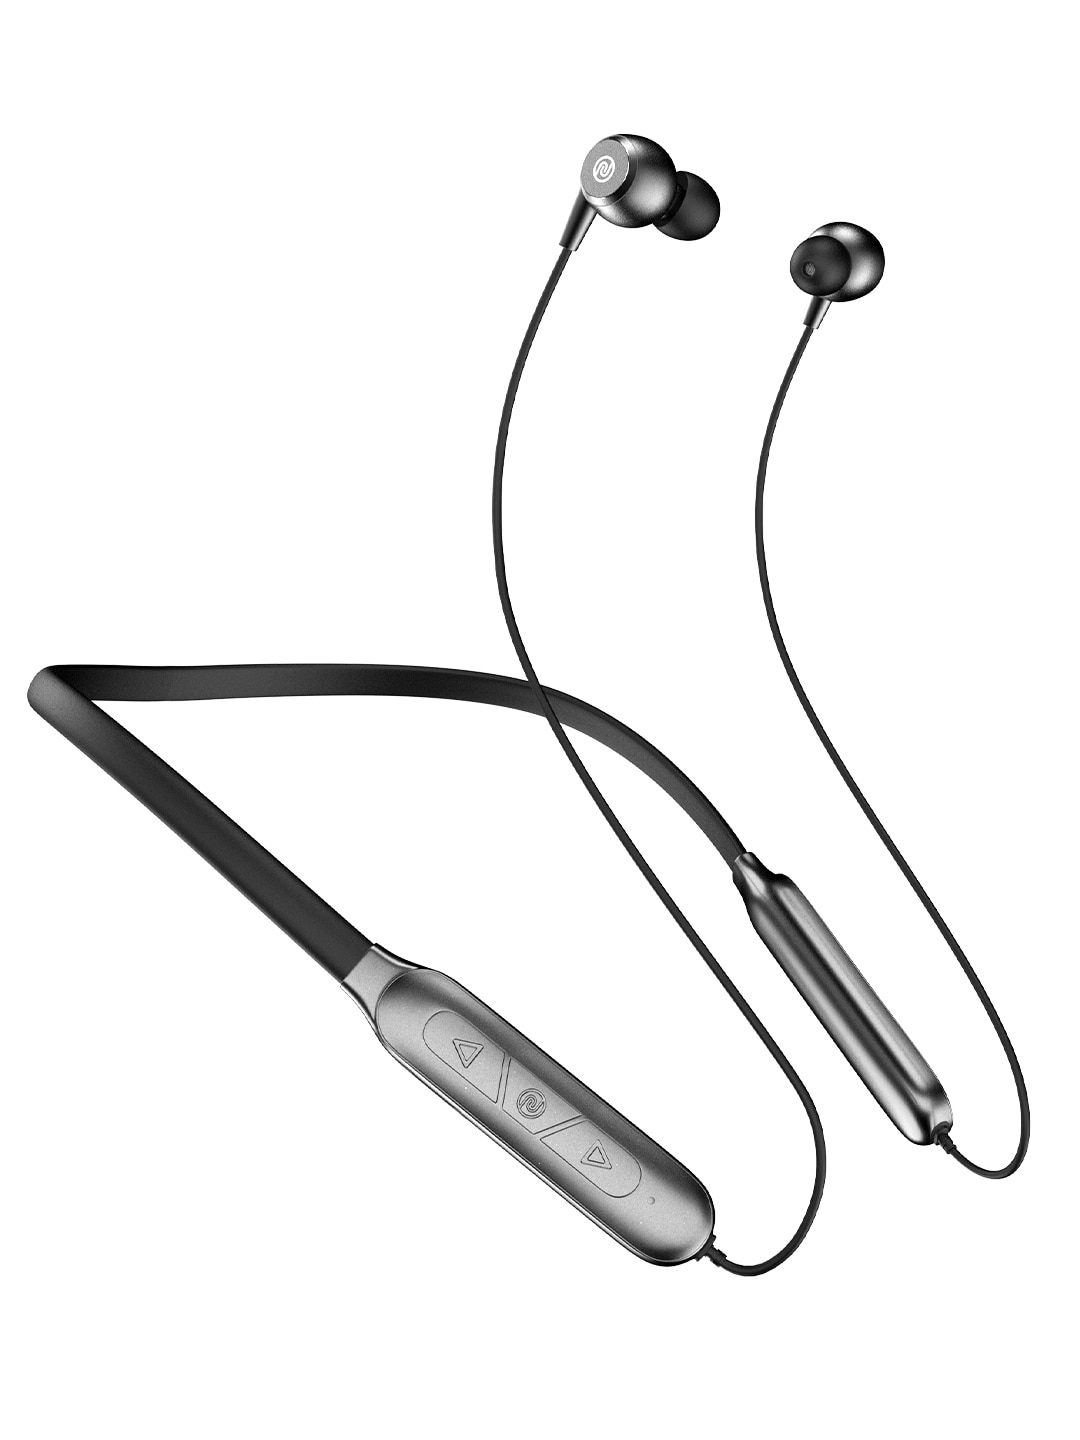 NOISE Nerve Bluetooth Wireless Neckband Earphones with Mic - Carbon Black Price in India